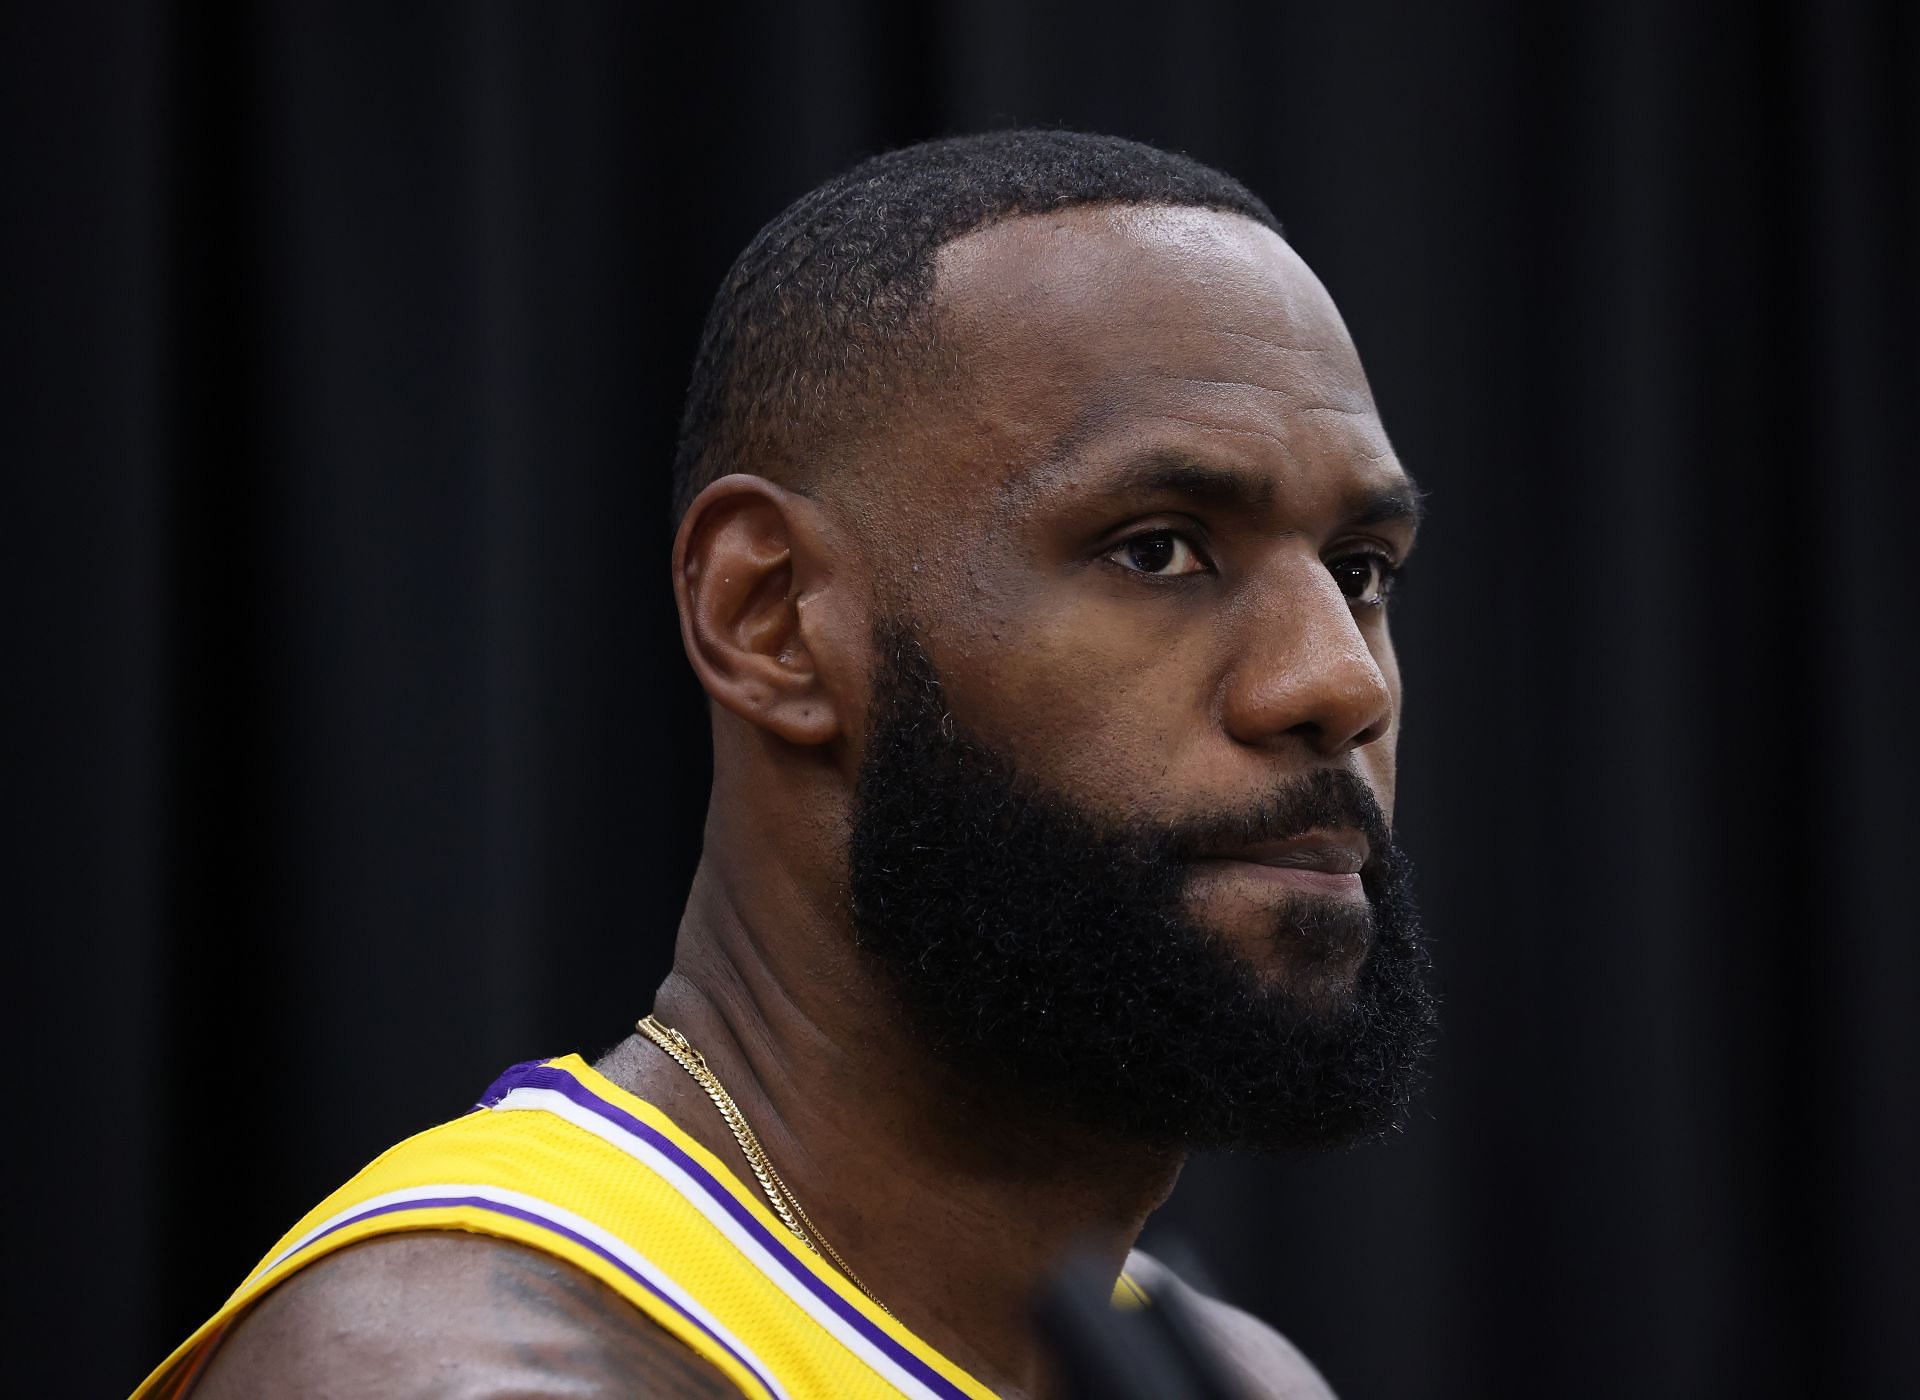 LeBron James during the LA Lakers 2021 Media Day.